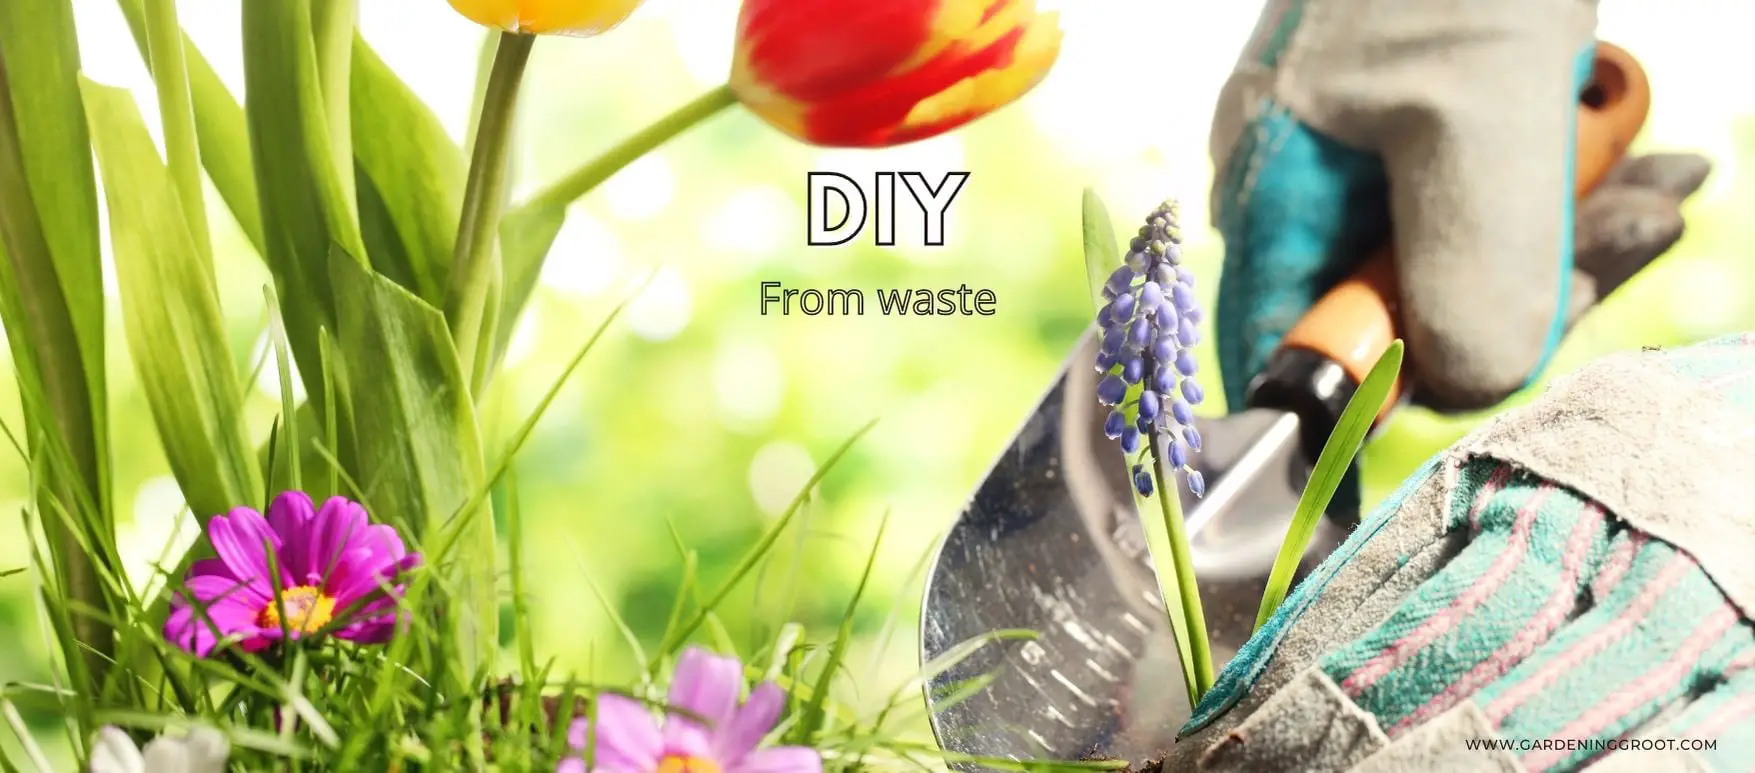 DIY from waste